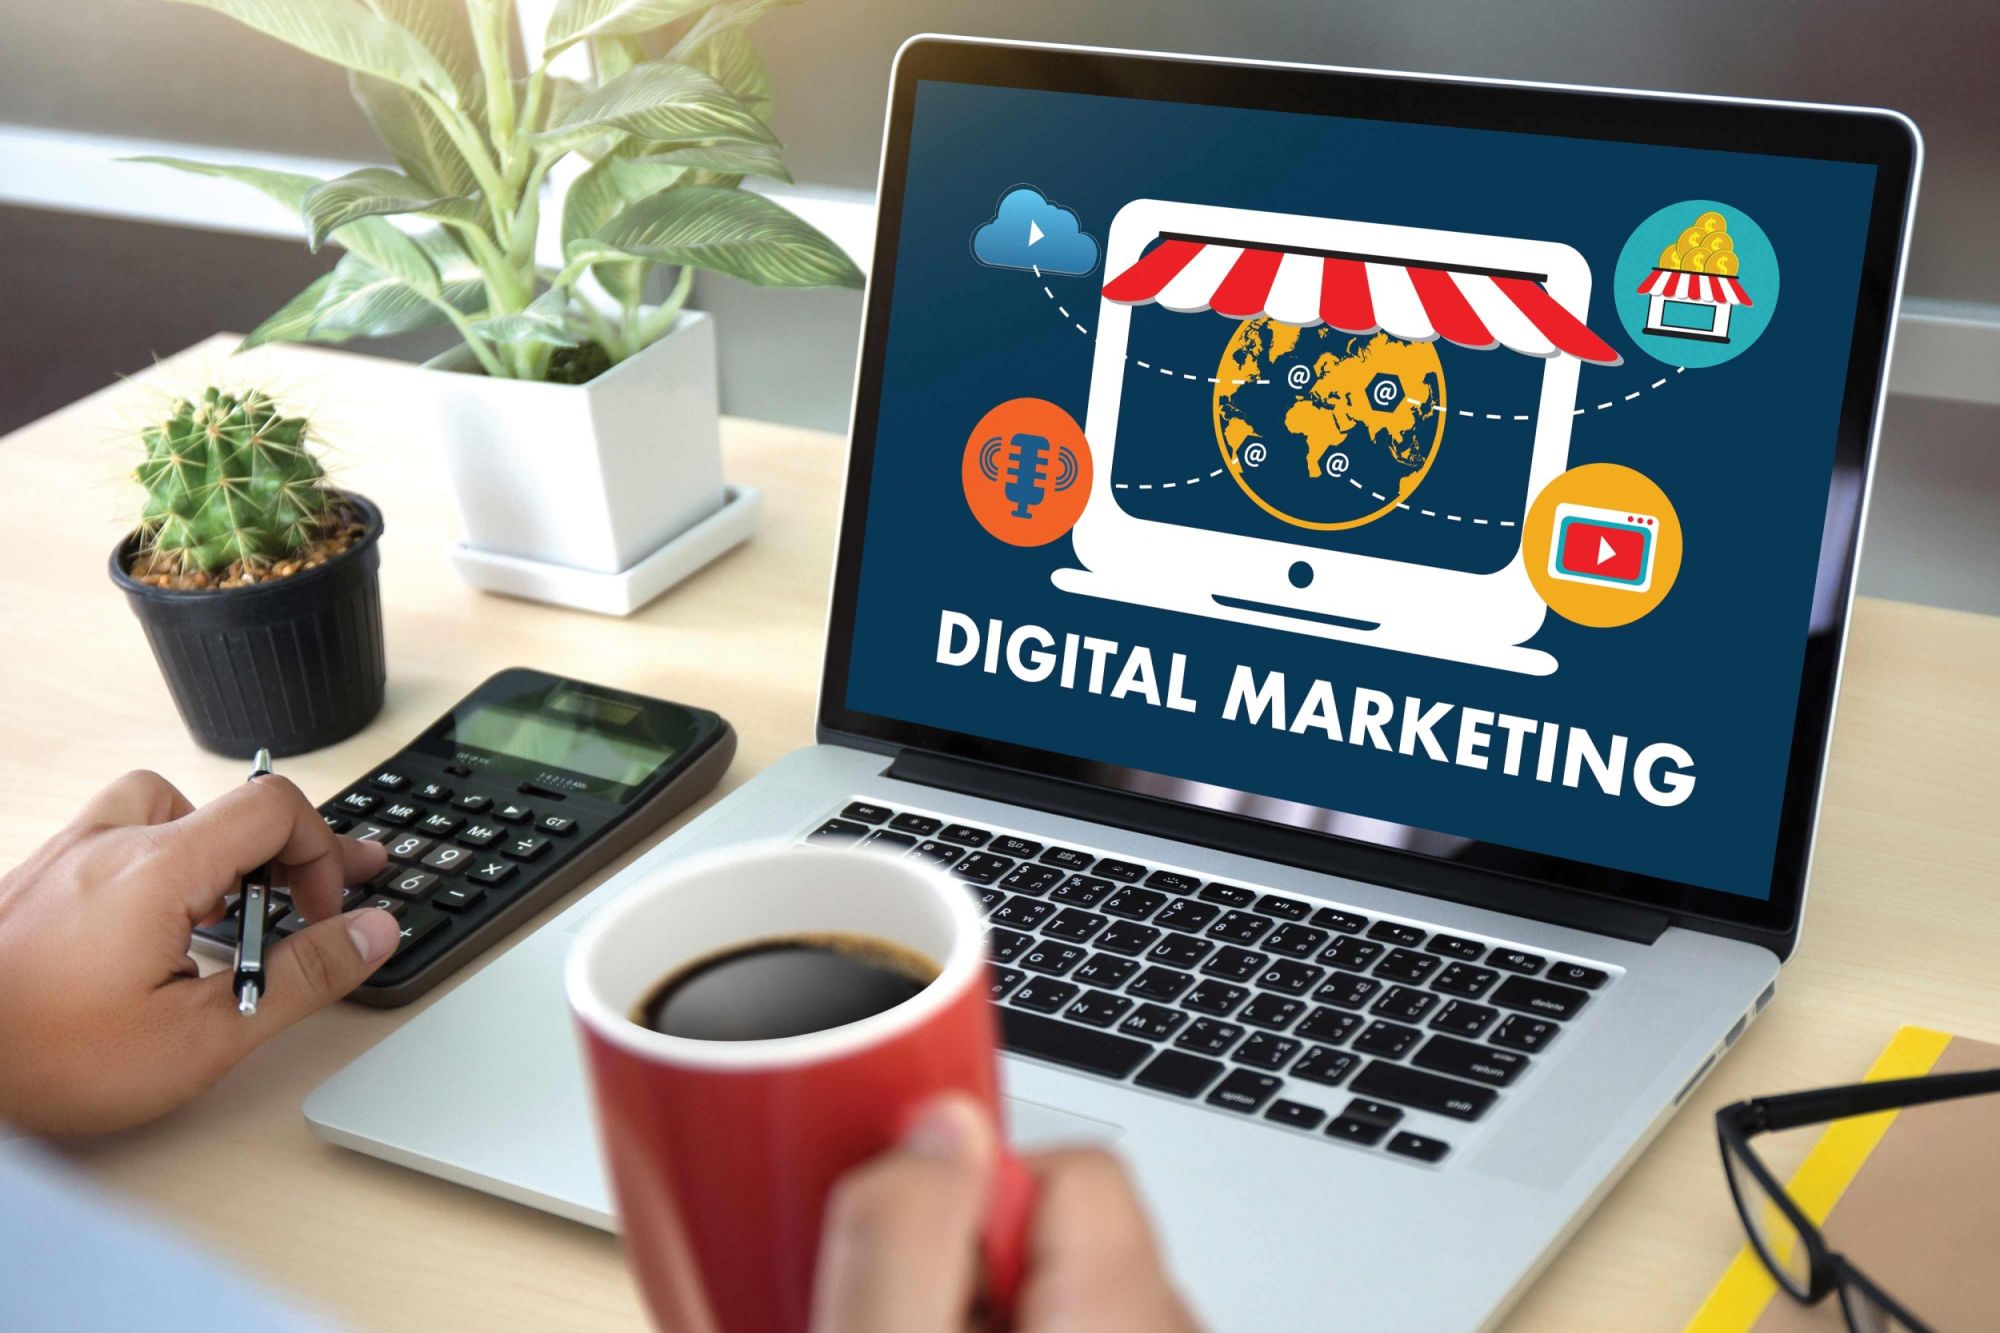 5 Steps to Become a Digital Marketing Professional